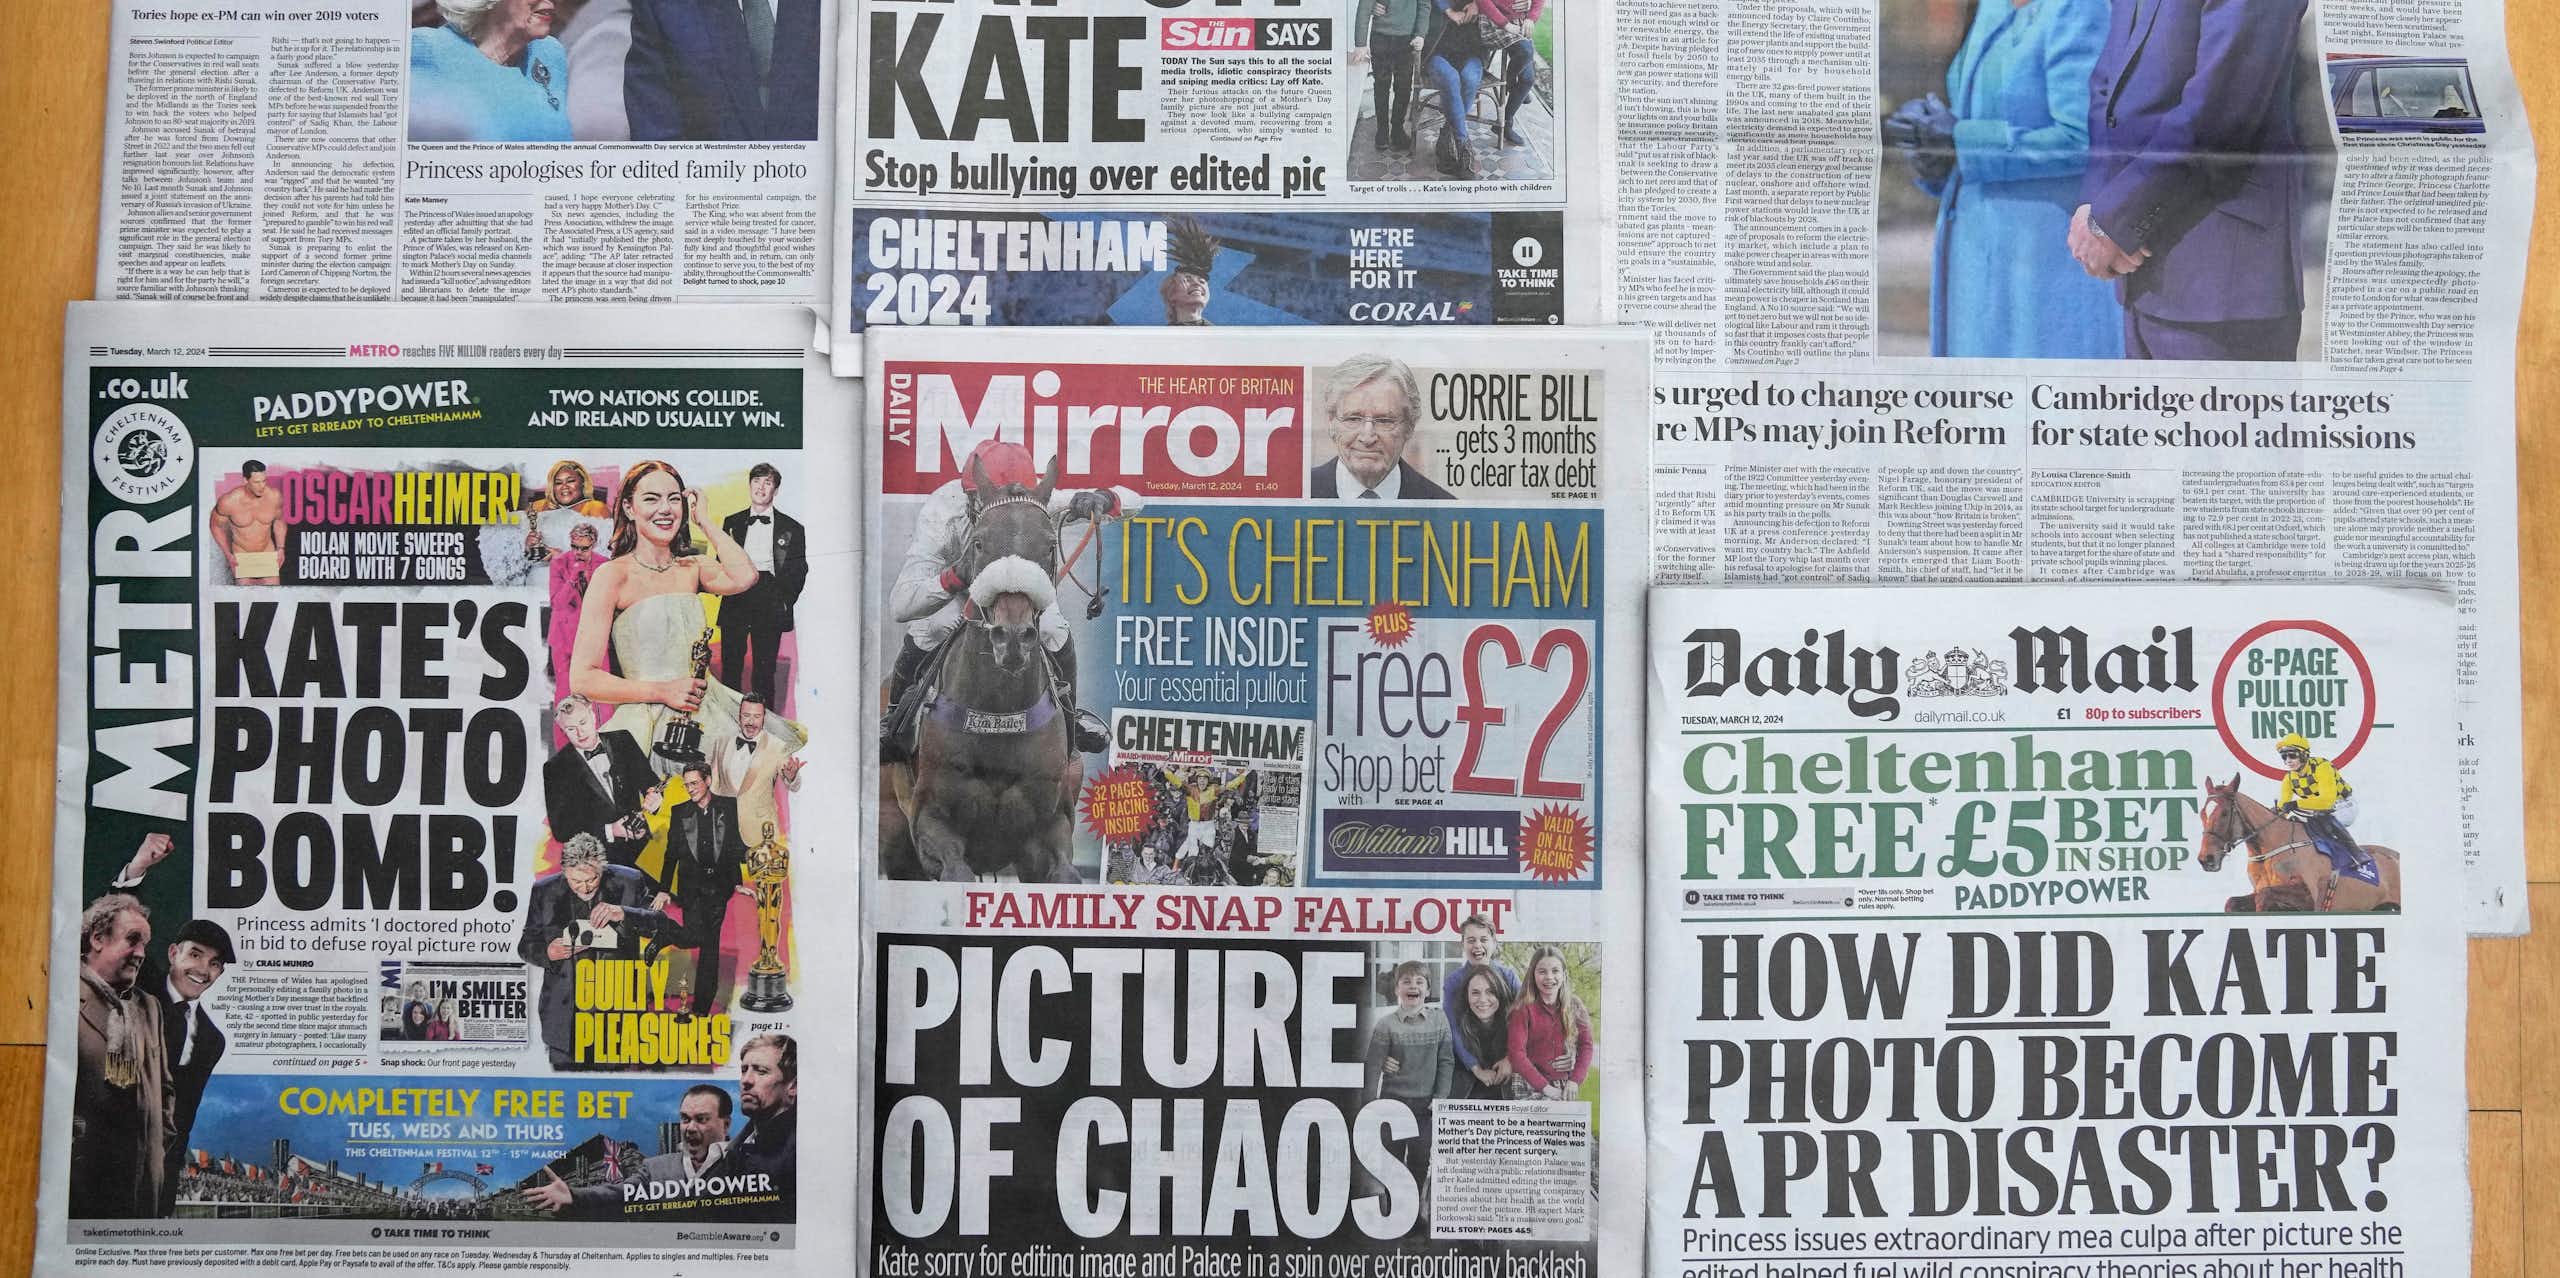 Newspaper front pages with headlines about Kate Middleton